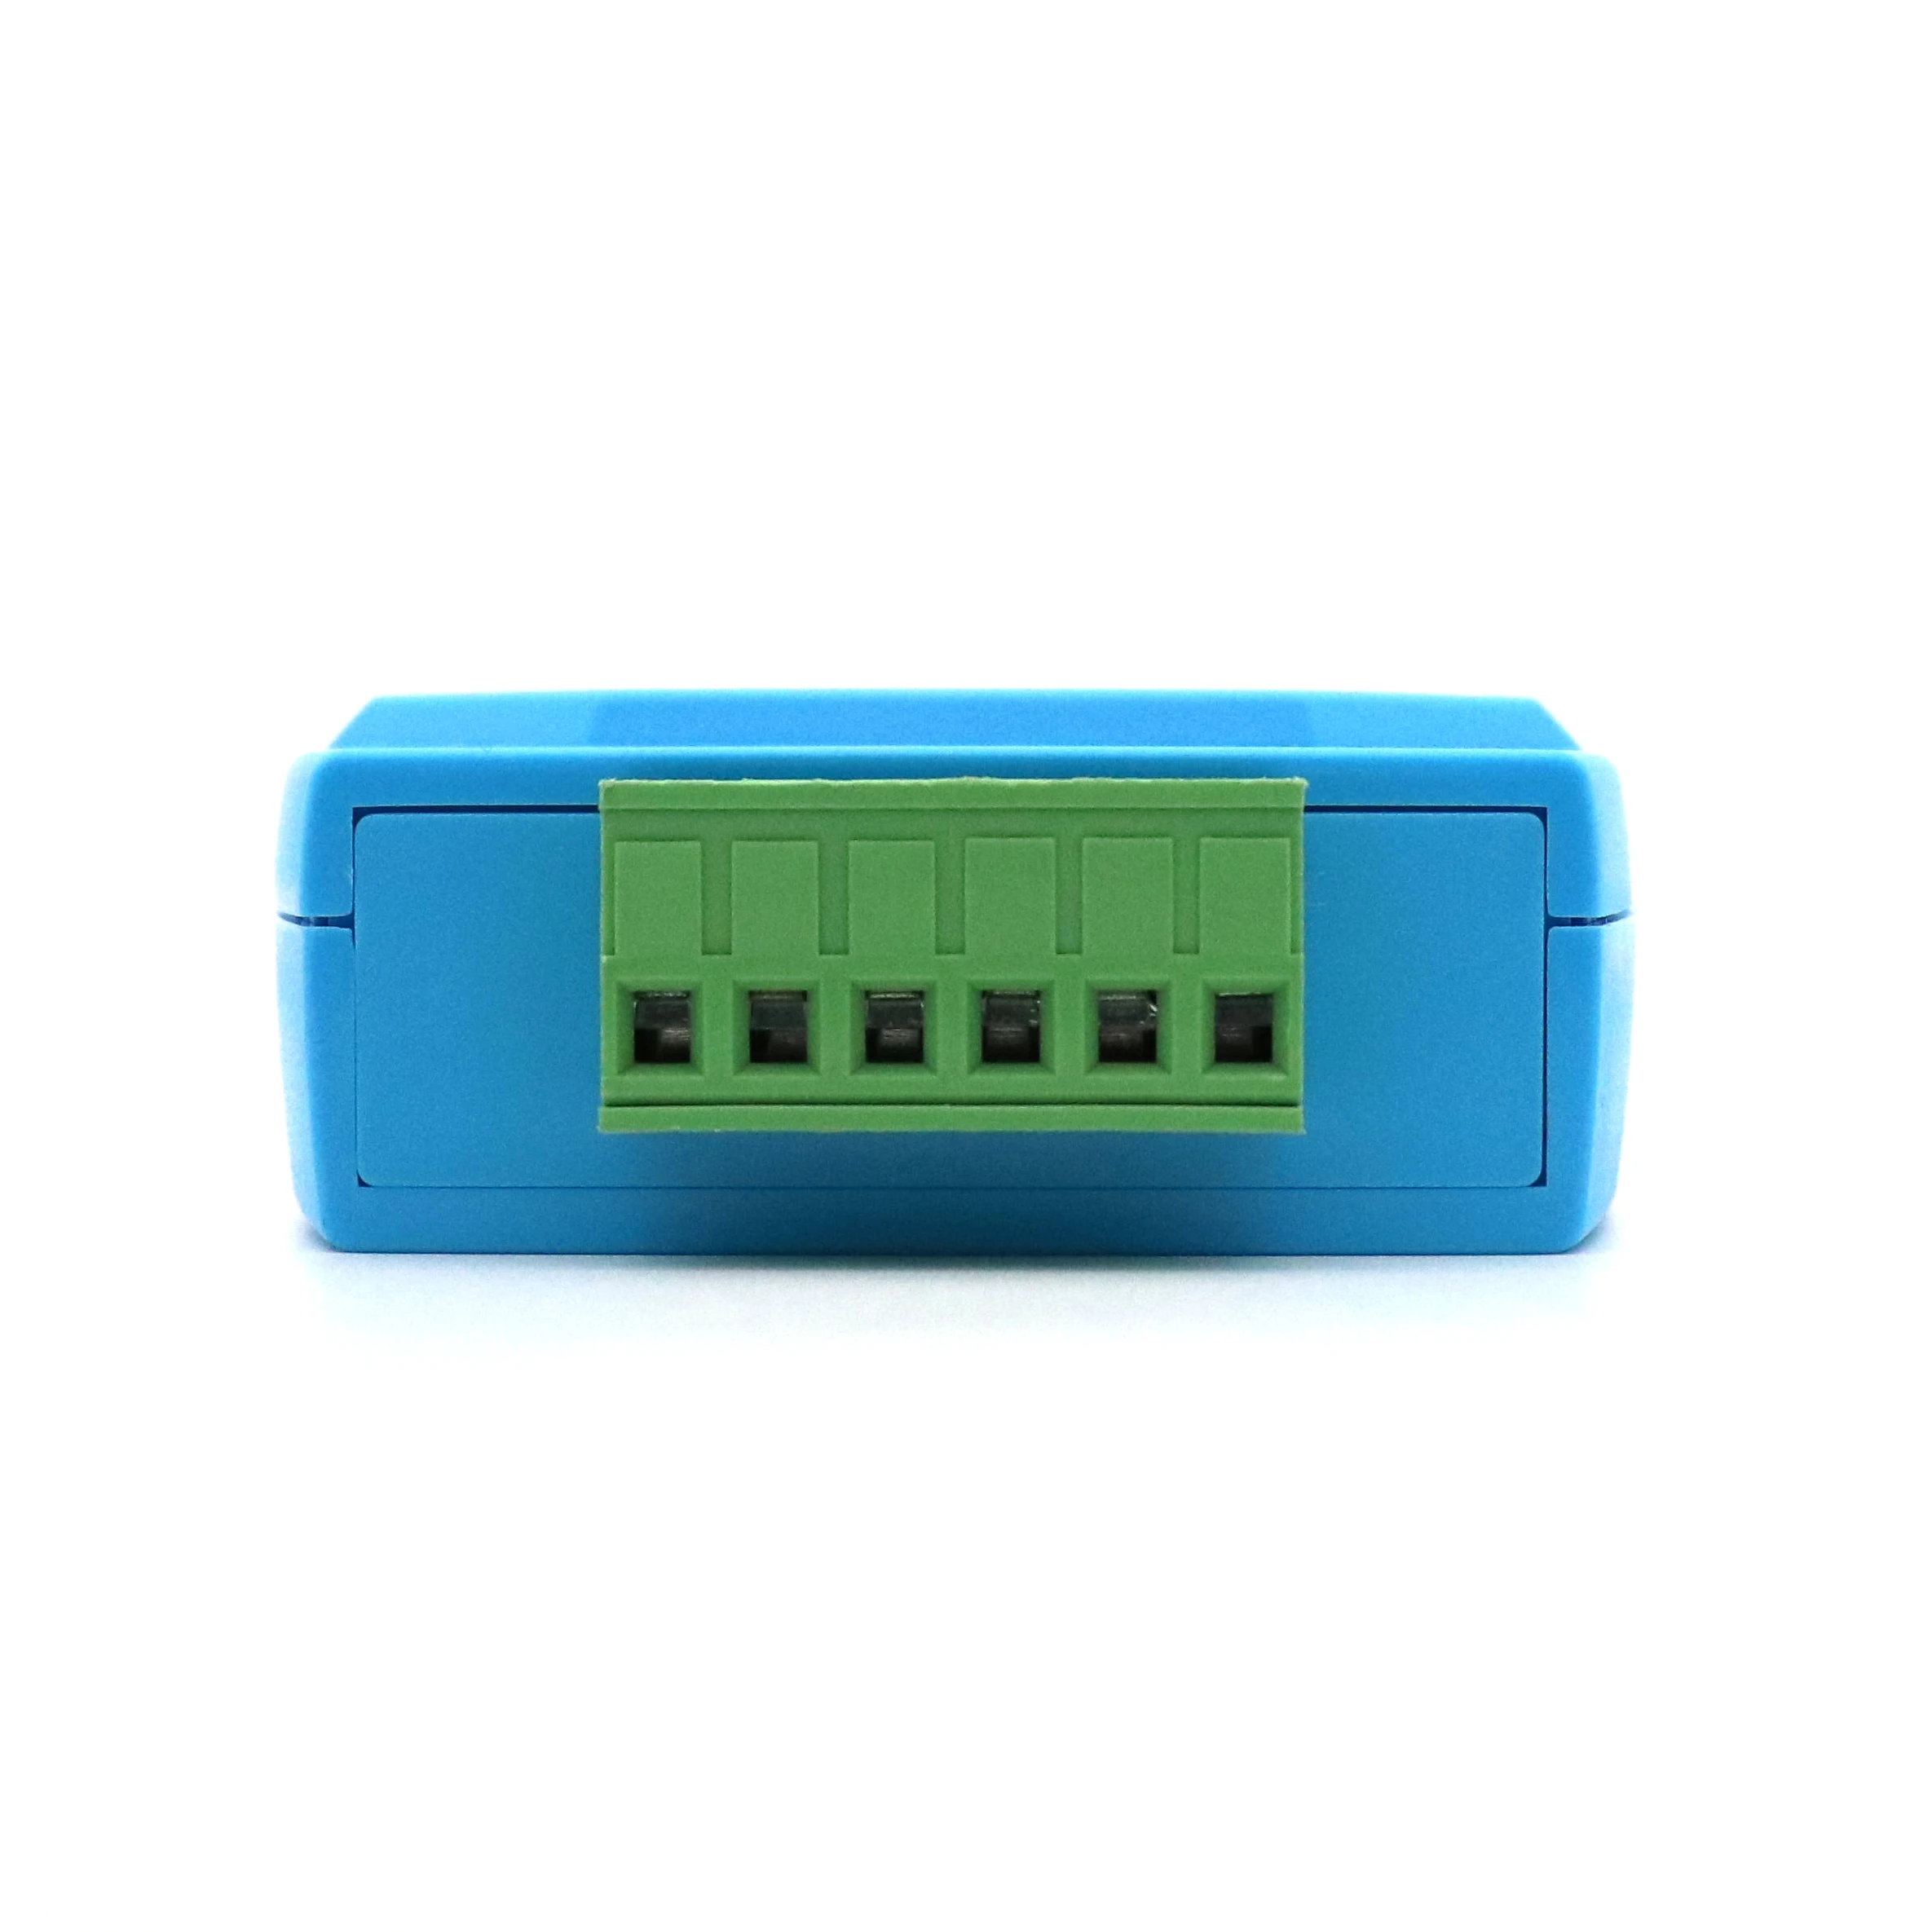 Can Bus Communication Adapter Bluetooth Gateway Suitable For Bluetooth Remote Monitoring Of Wind Power